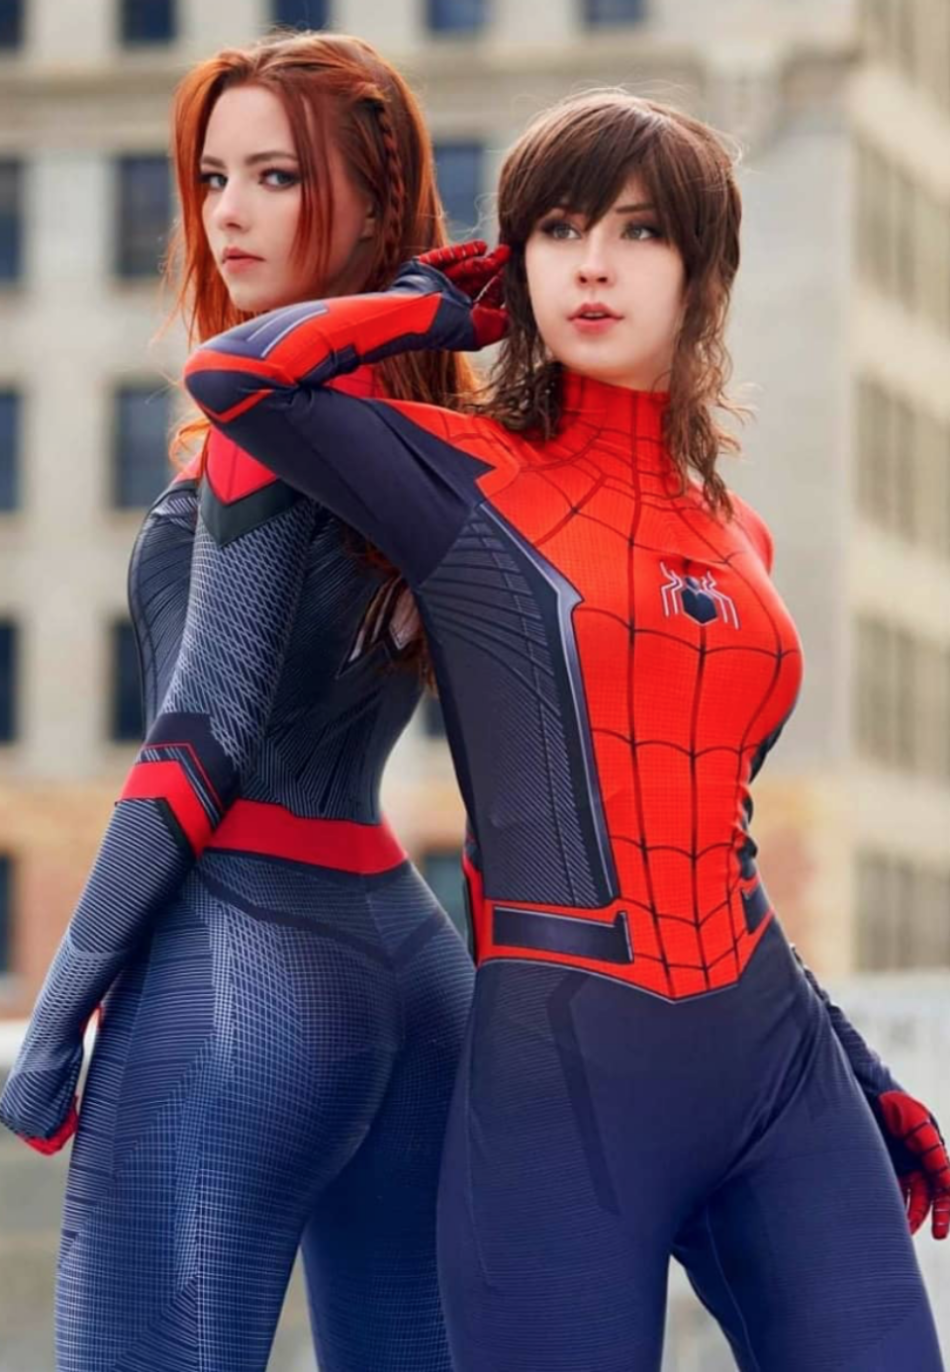 Sexy Red Hot Cosplay Girls Spiderman Women Best Photo Compilation 2021 (89 HQ Photos) 517